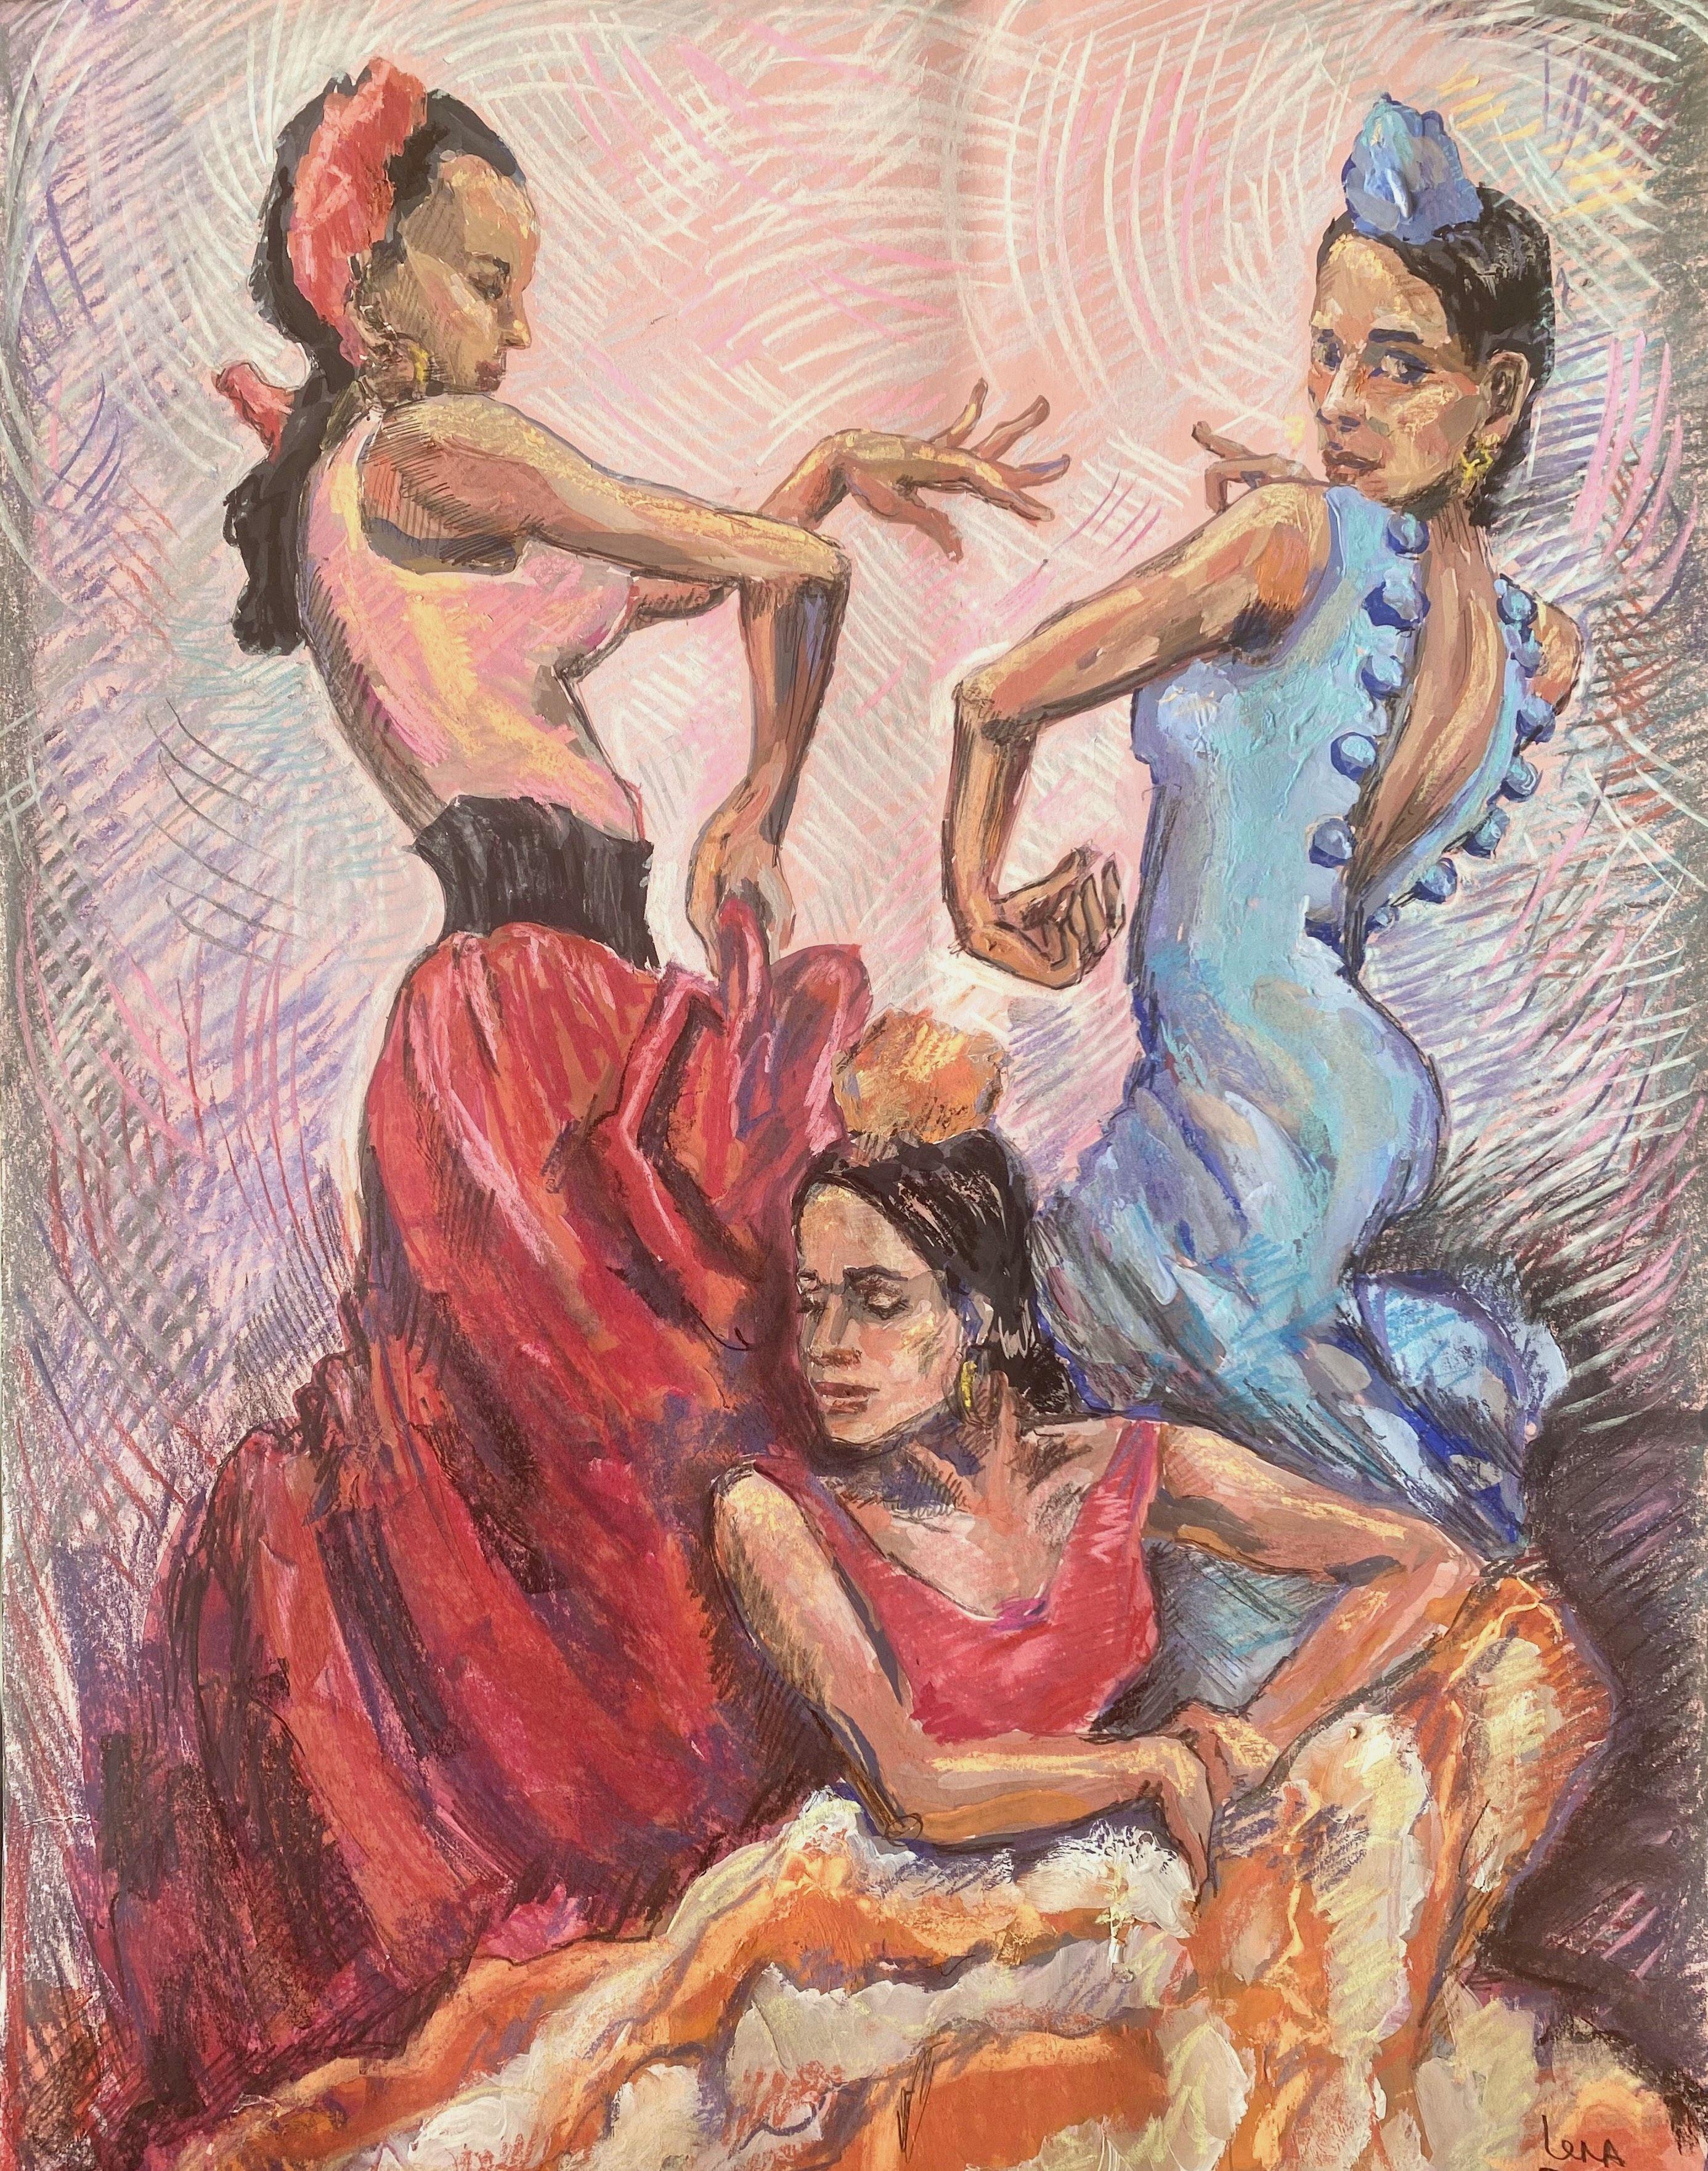 Silhouettes. 3 flamenco girls, Drawing, Pastels on Paper 1